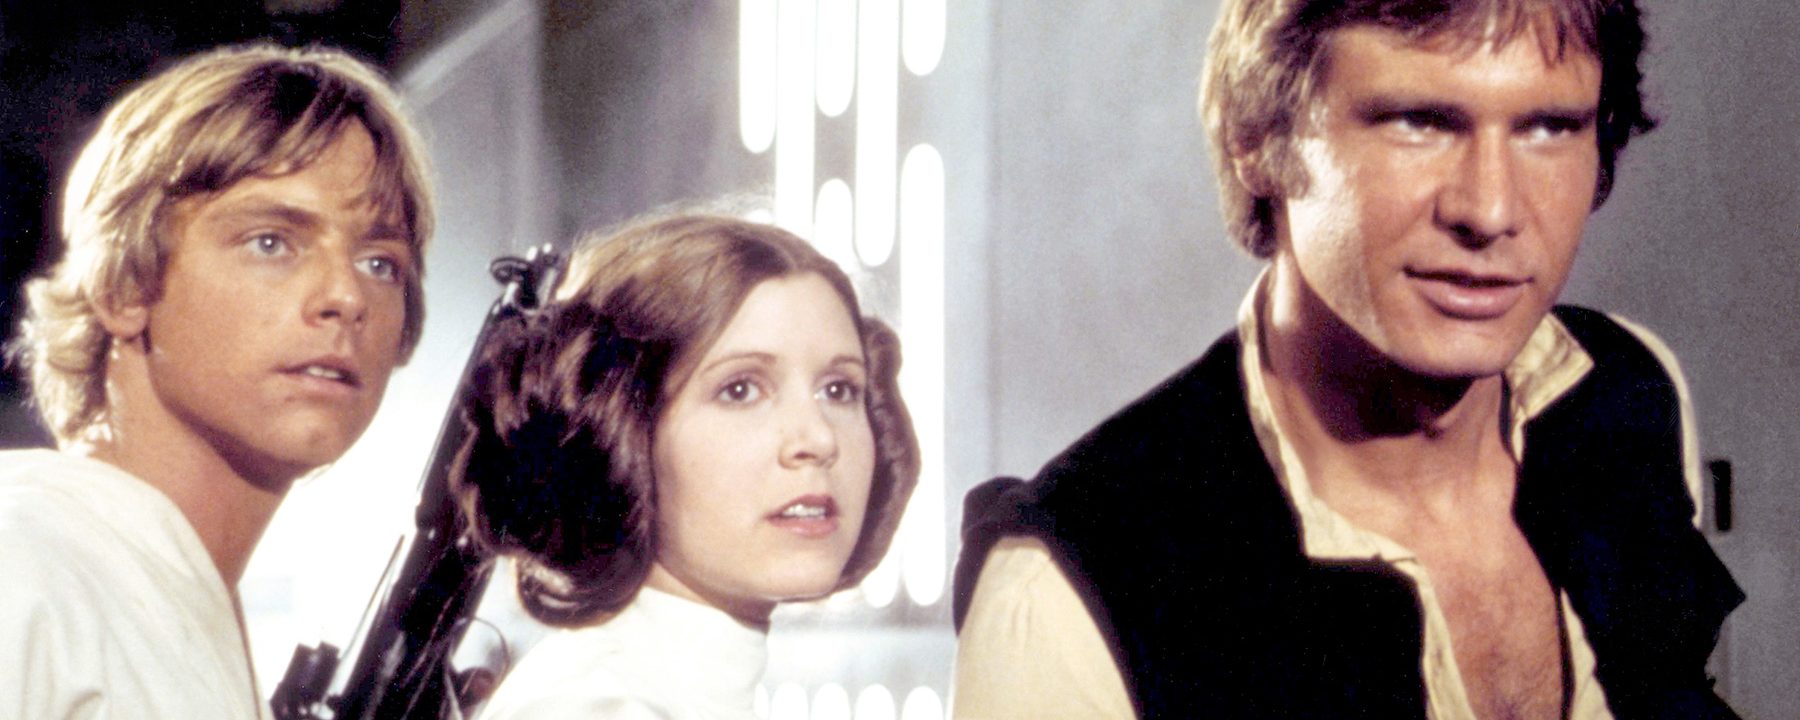 Star Wars' Actress Carrie Fisher Remembered on May the Fourth - InsideHook